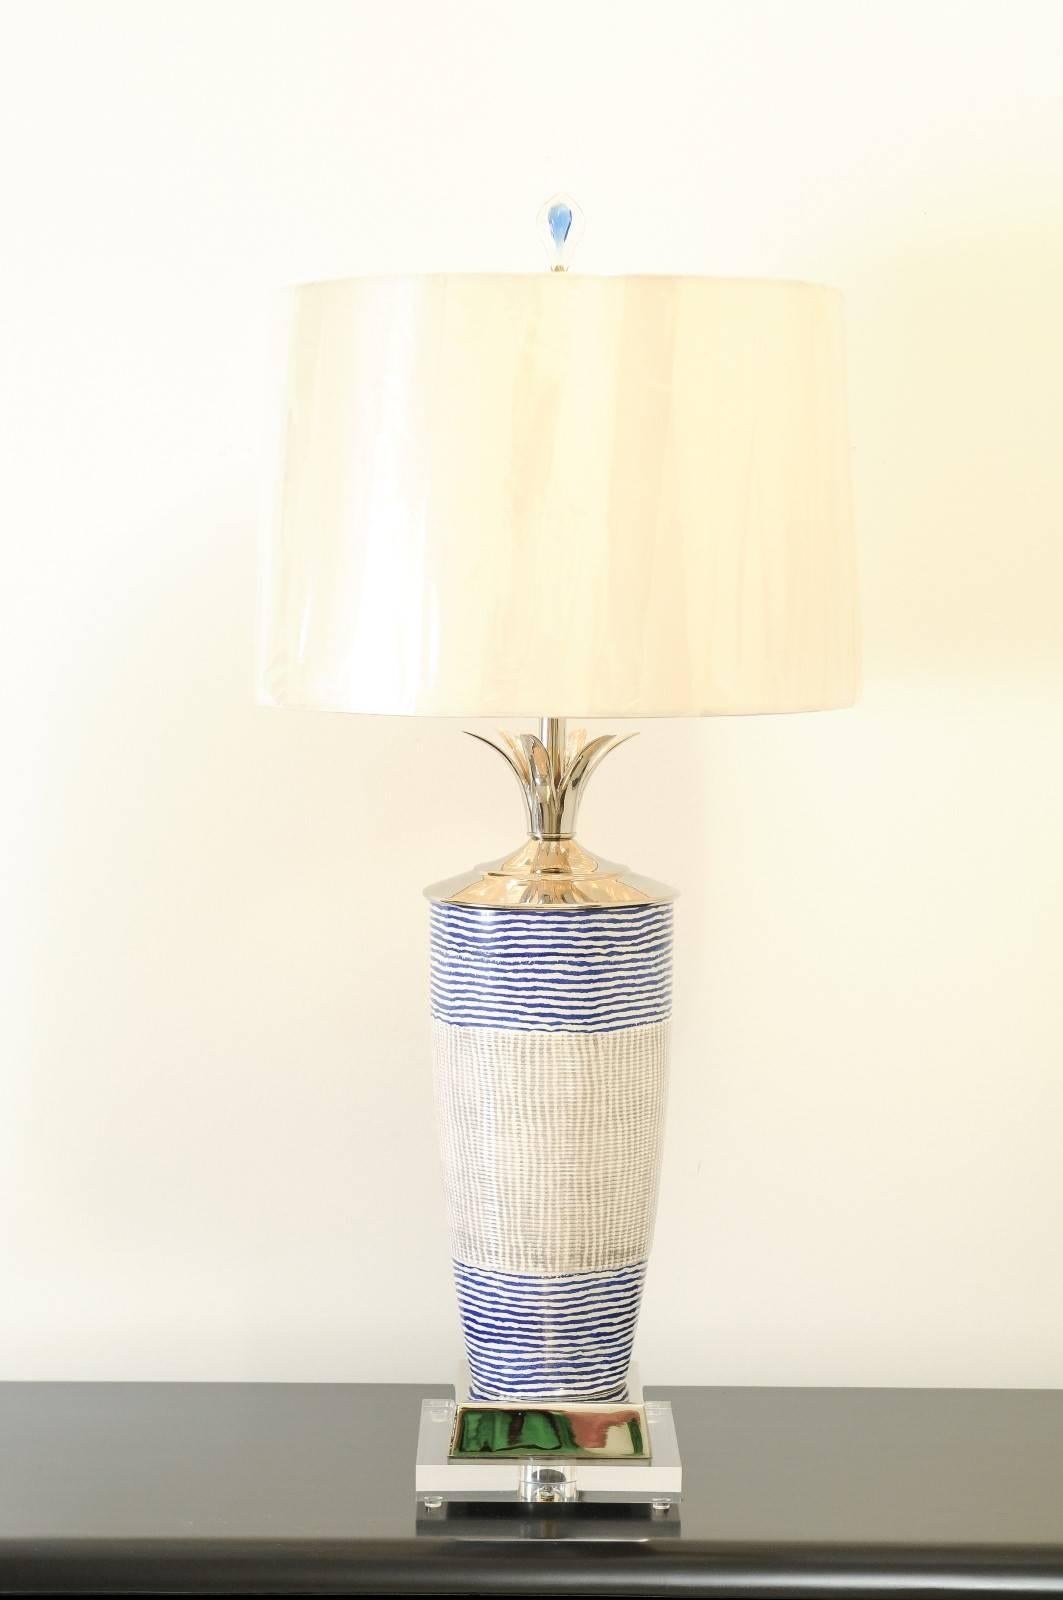 These magnificent lamps are shipped as photographed and described in the narrative. They are custom built using materials of the highest quality and are shipped complete with the new shades, harps and finials shown in the photos.

 A stunning pair